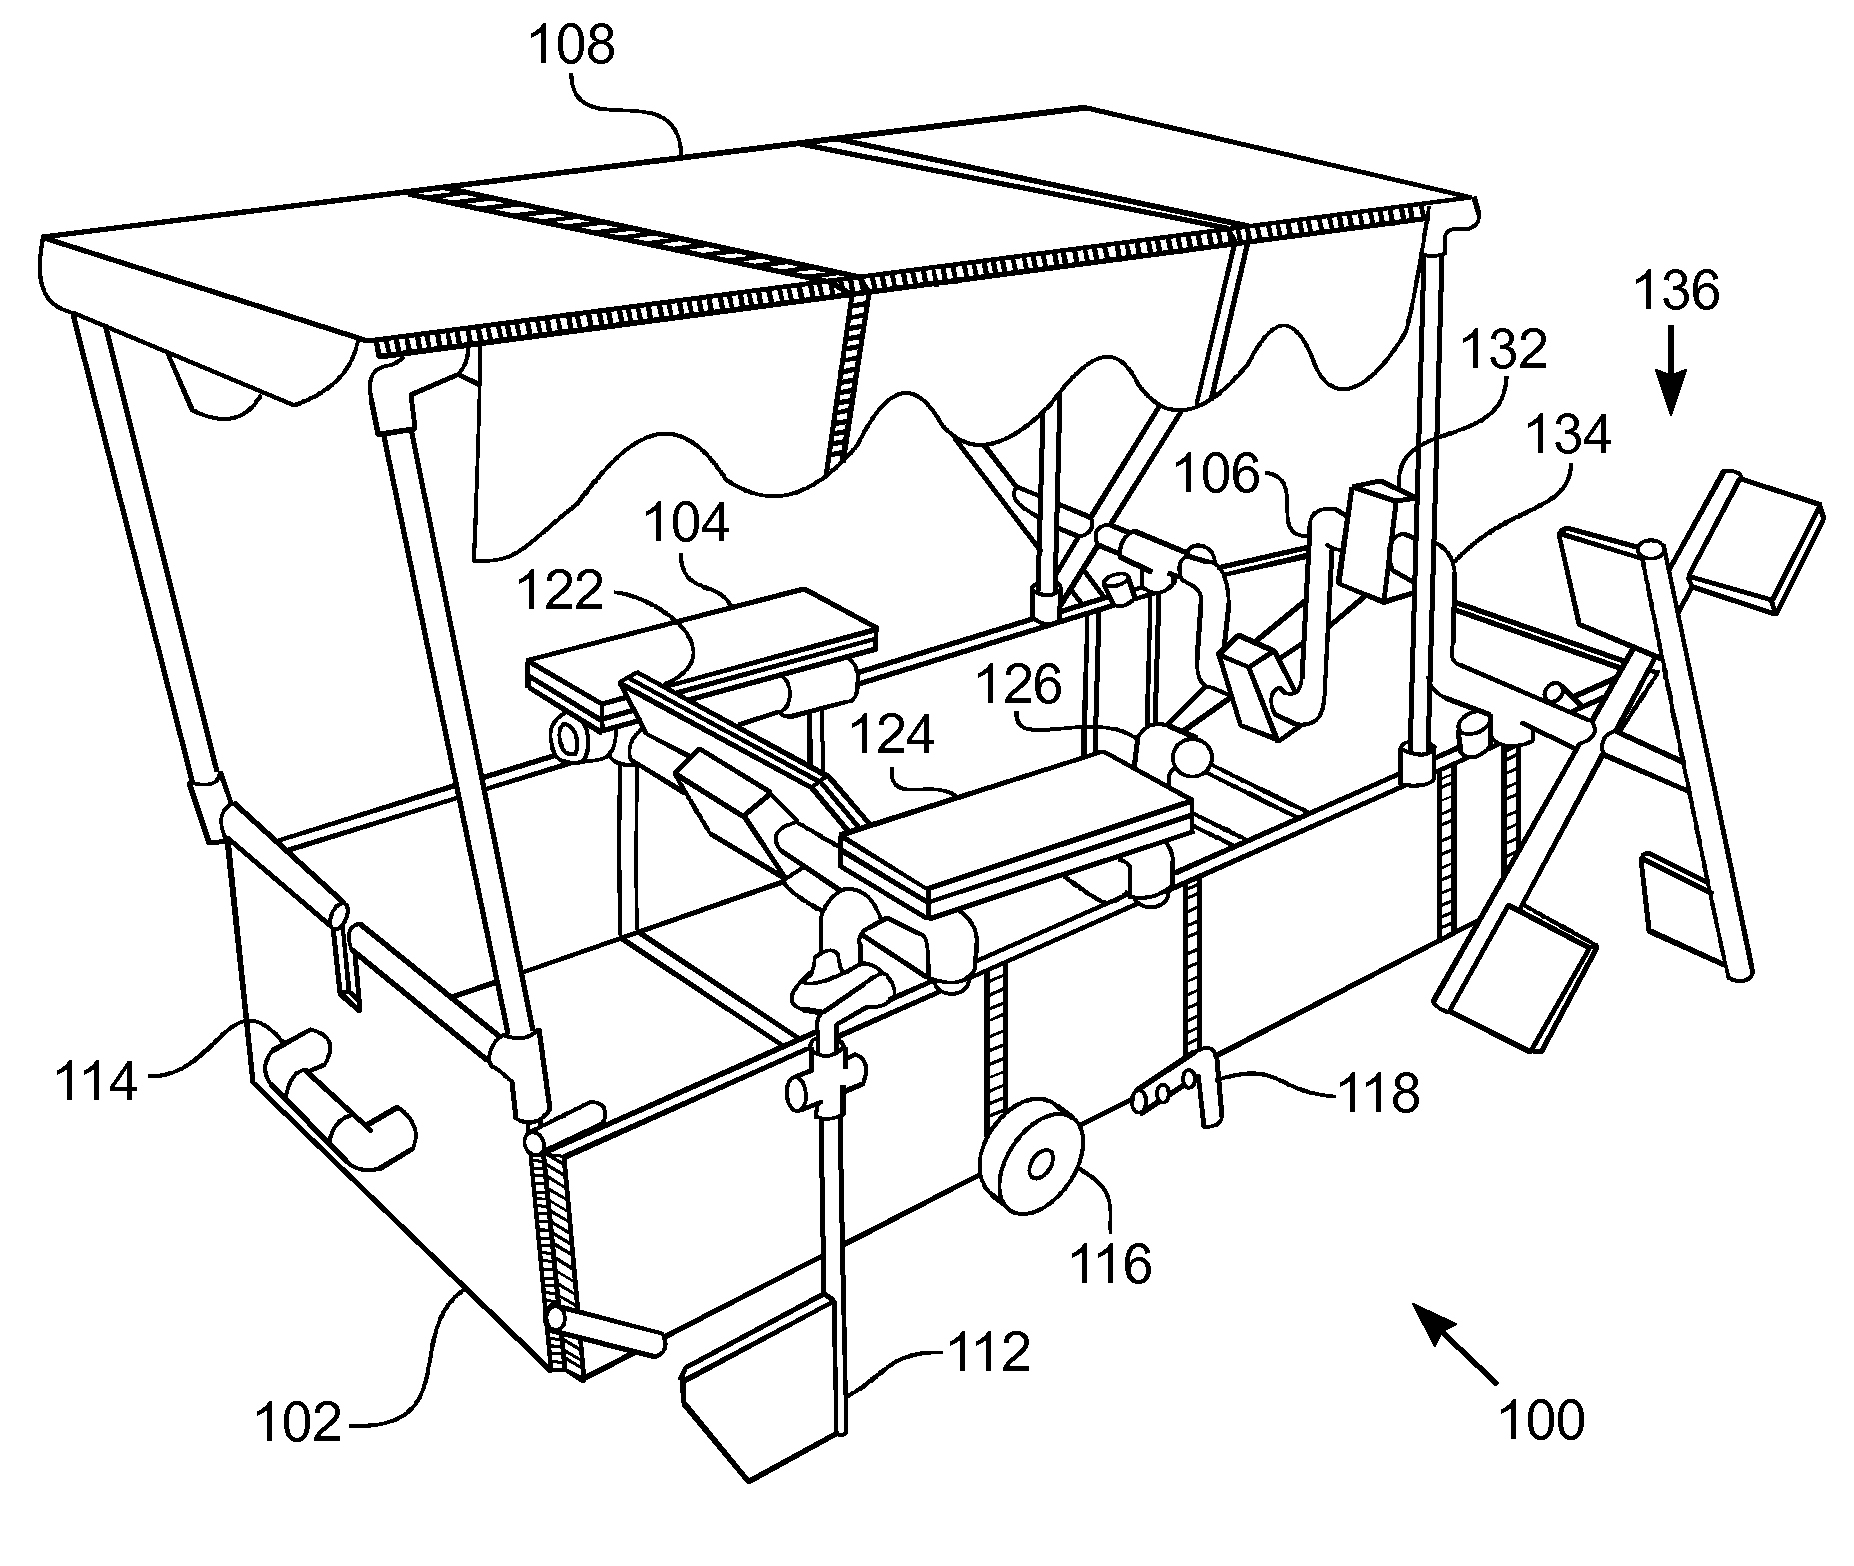 Boat foldable into a compact self-contained shape